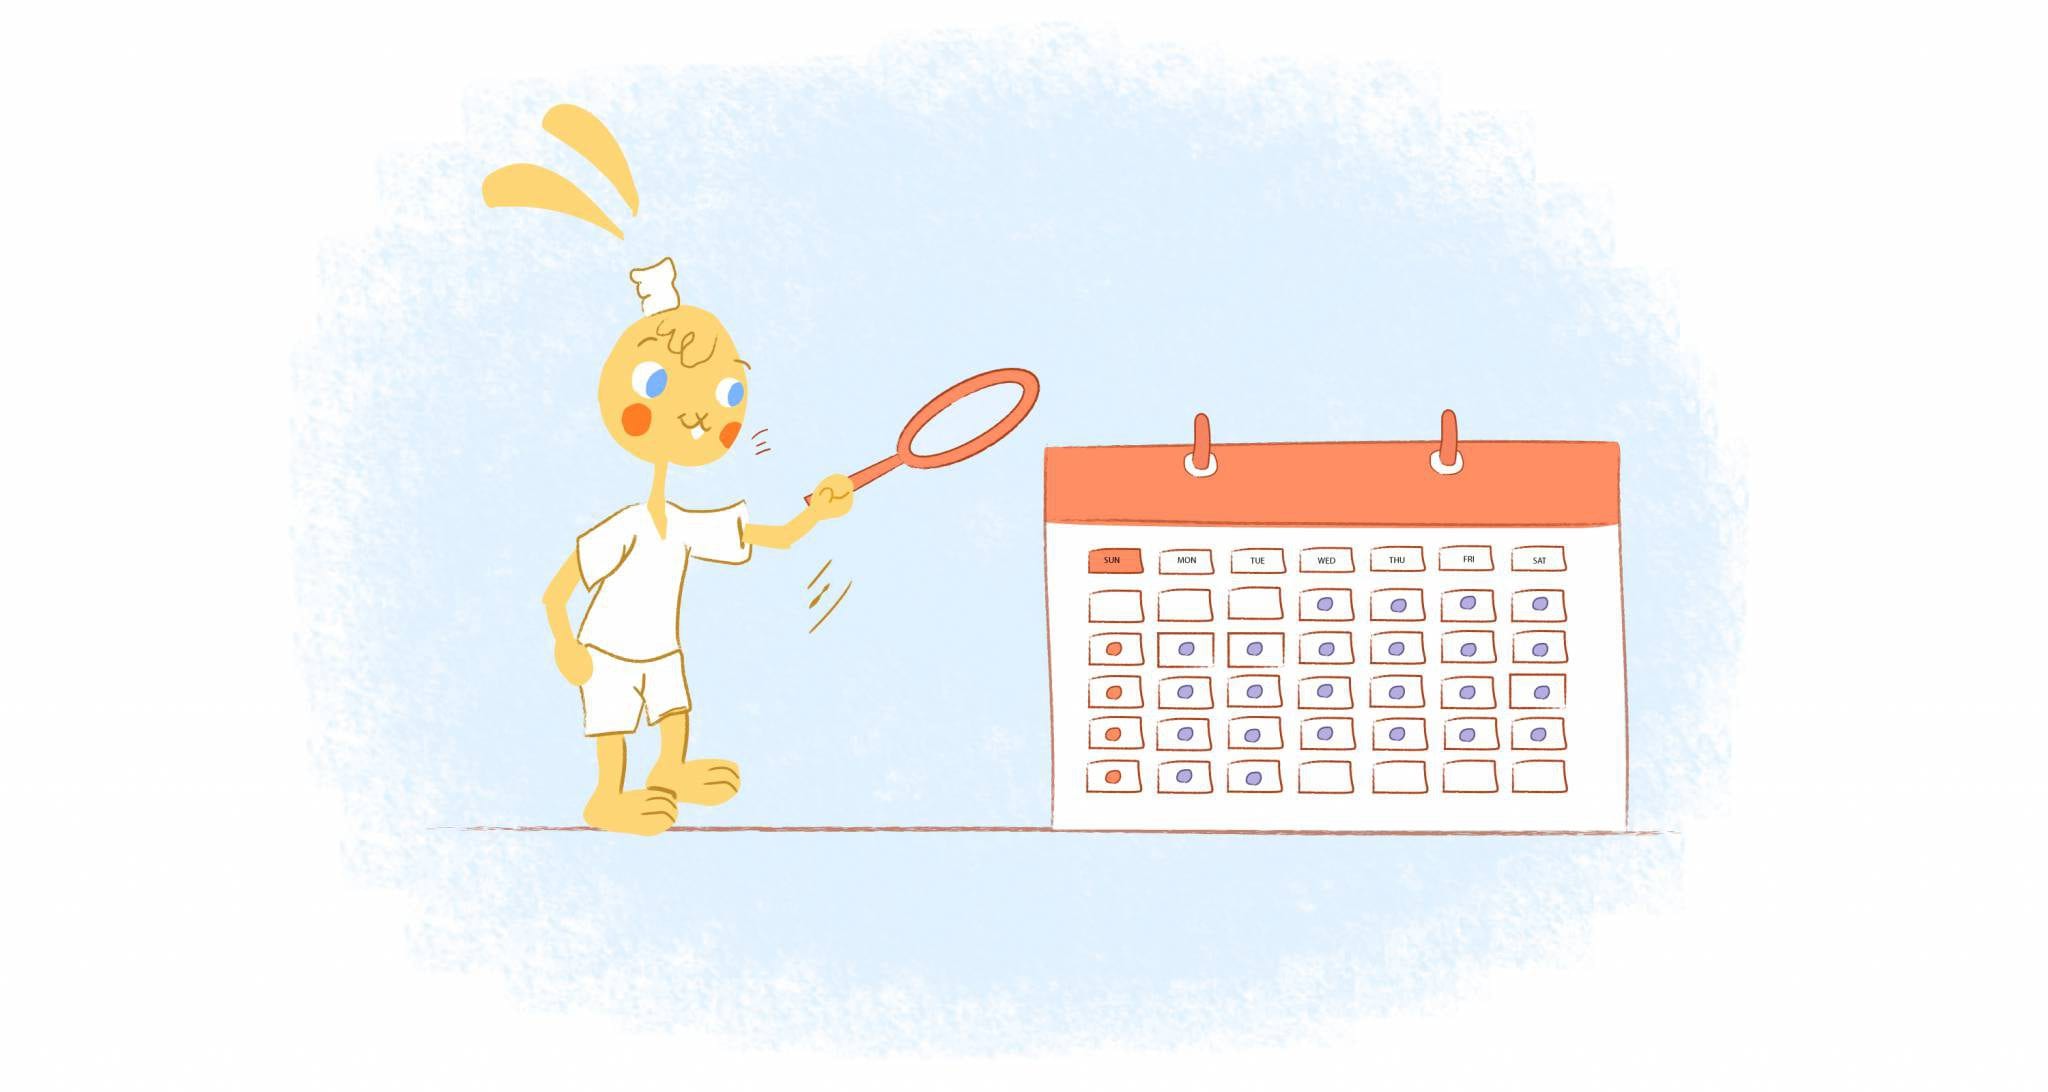 housekeeping chores on your calendar